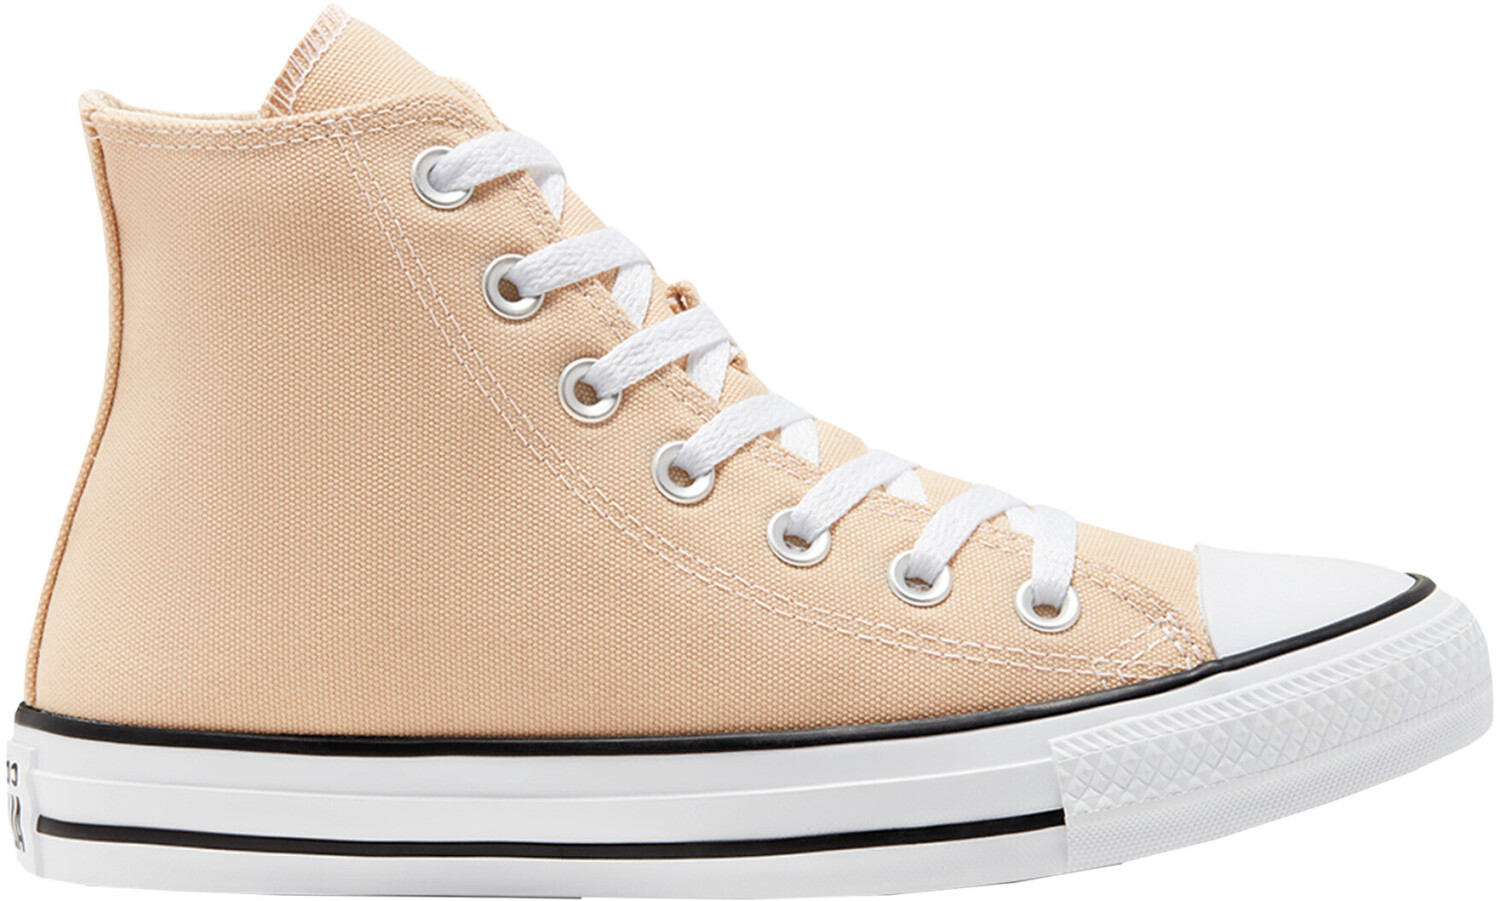 Buy Converse Chuck Taylor All Star Hi Farro from £64.99 (Today) – Best ...